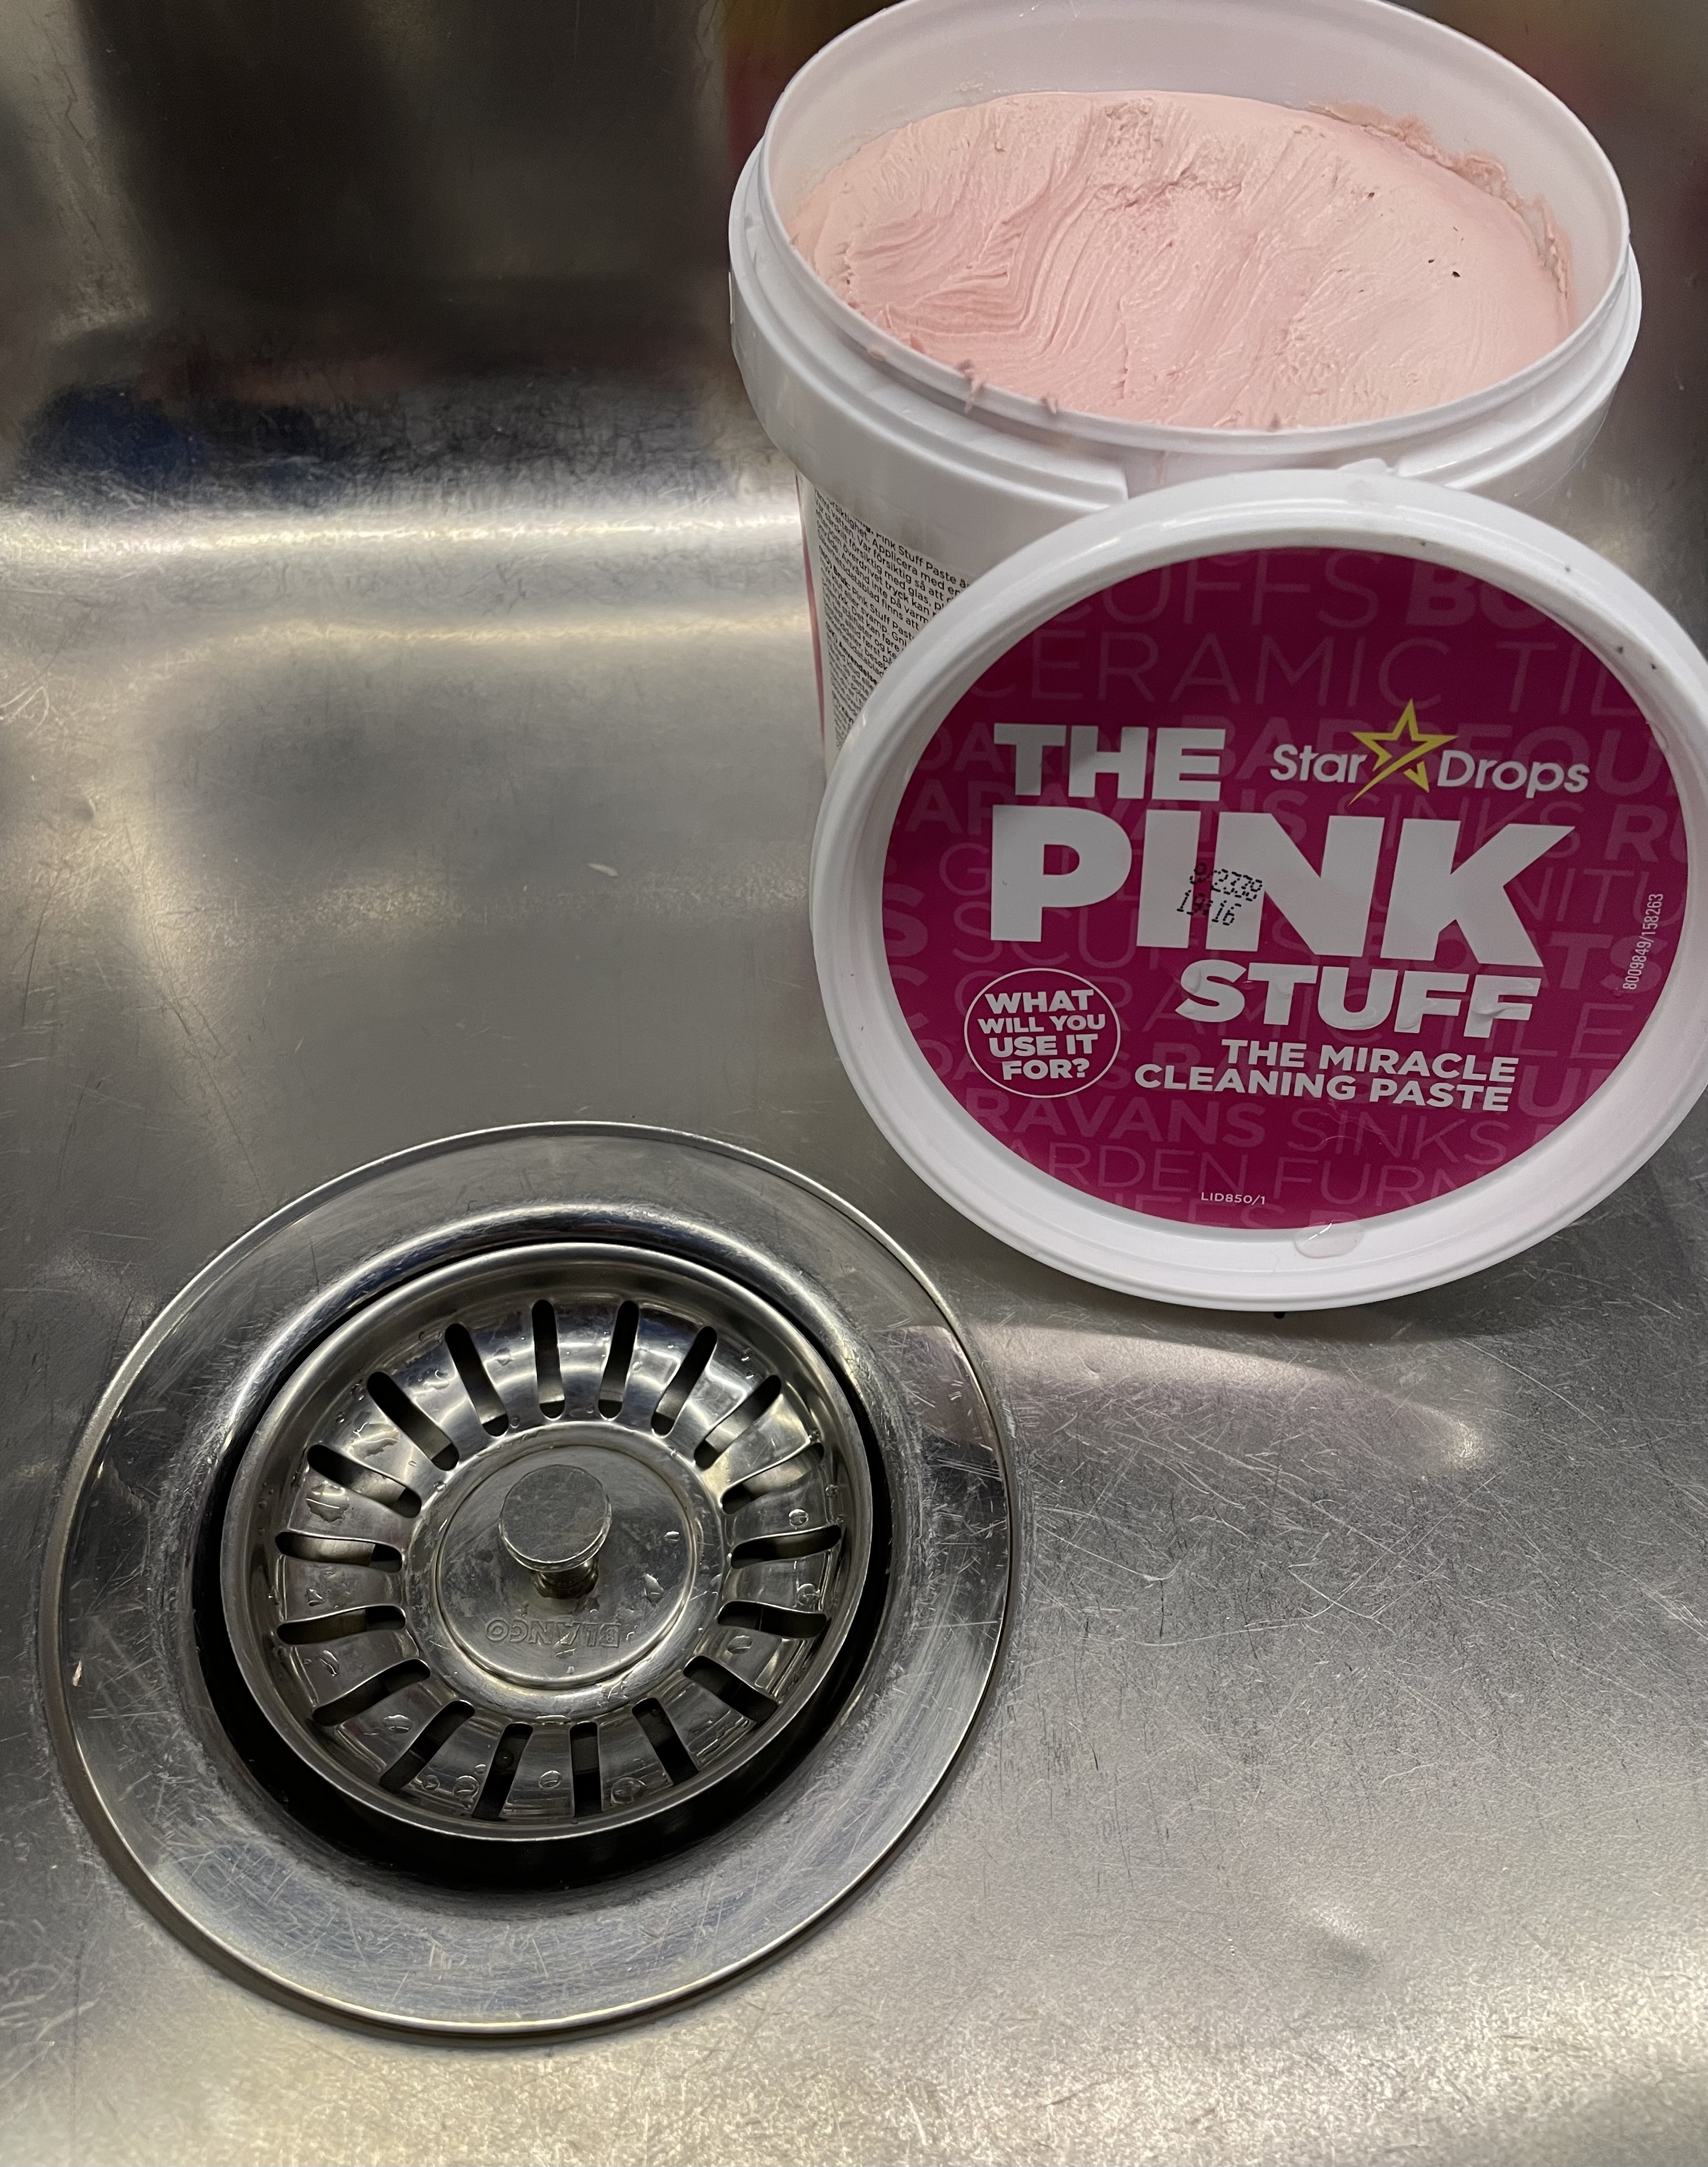 The Pink Stuff - The Mircale All Purpose Cleaning Paste 850g